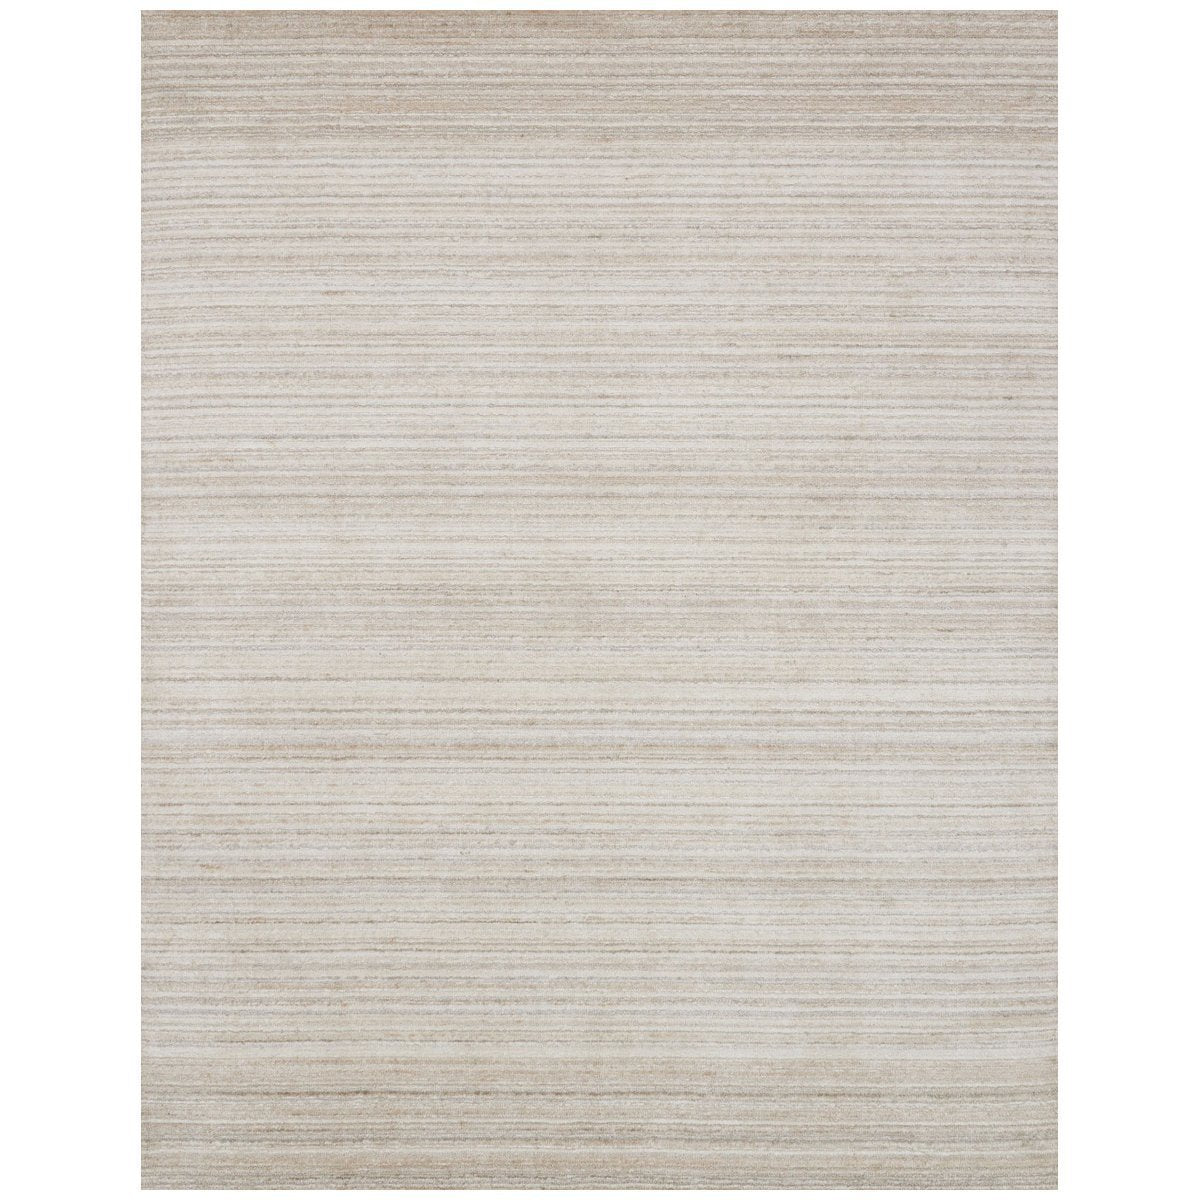 Loloi Haven VH-01 Natural Hand Woven Rug